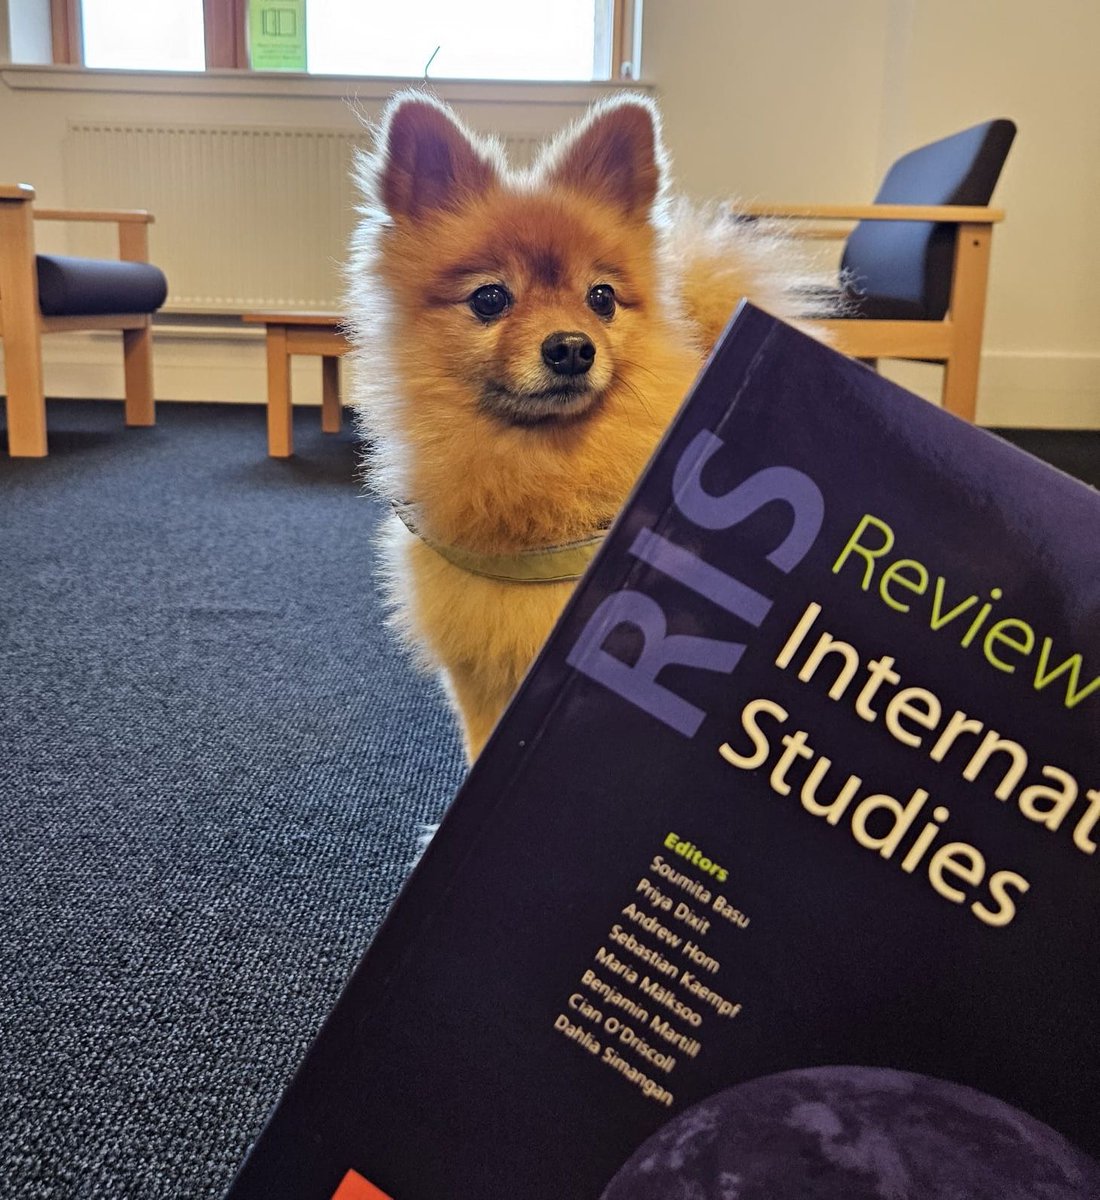 Are you (like Rex) looking for your next great read? The Review of International Studies has all its issues archived and a great selection of First View articles. Take a look here 👇 👇 buff.ly/3SH0rzR